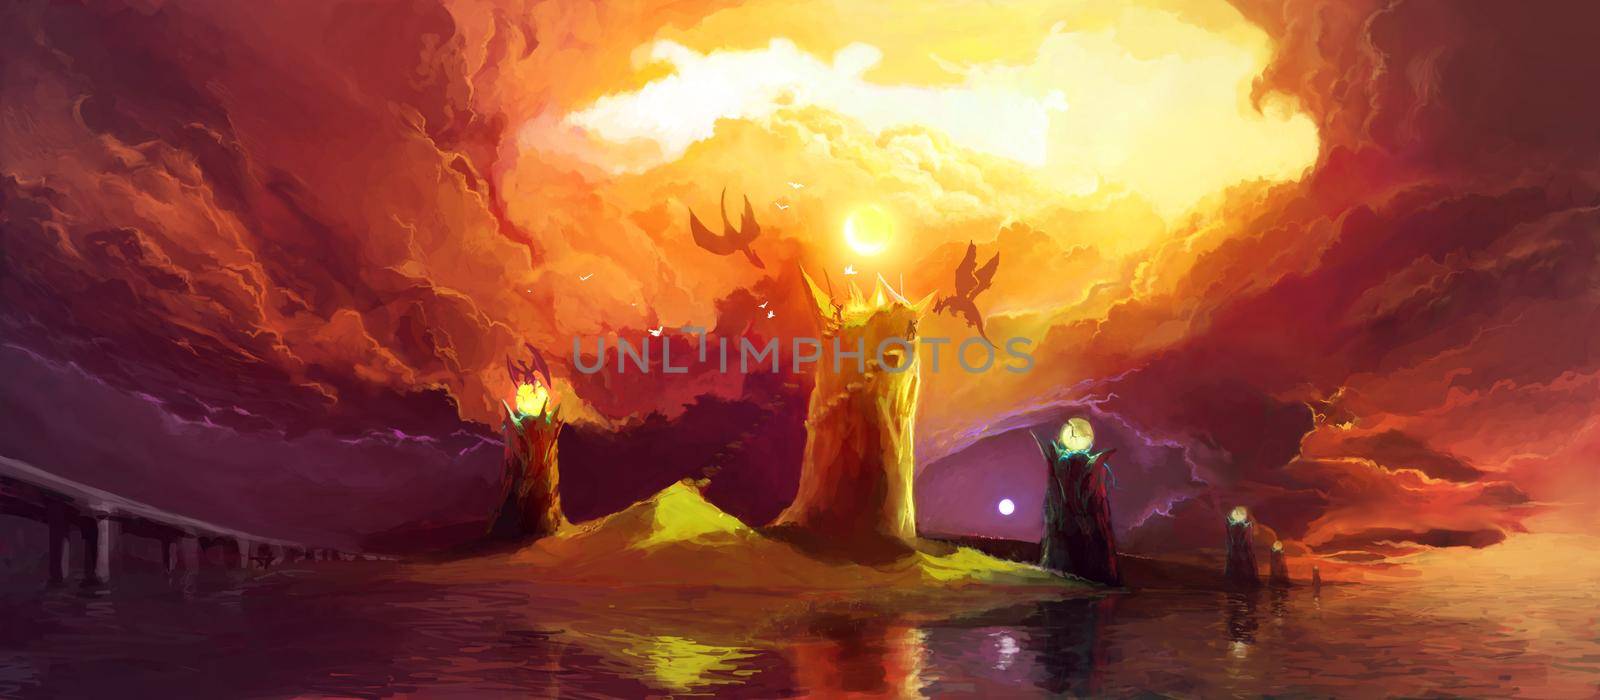 Fantasy Illustration with Magic Towers and Dragons under dark clouds. Scenic Fairytail Illustration about the Struggle between Good and Evil.